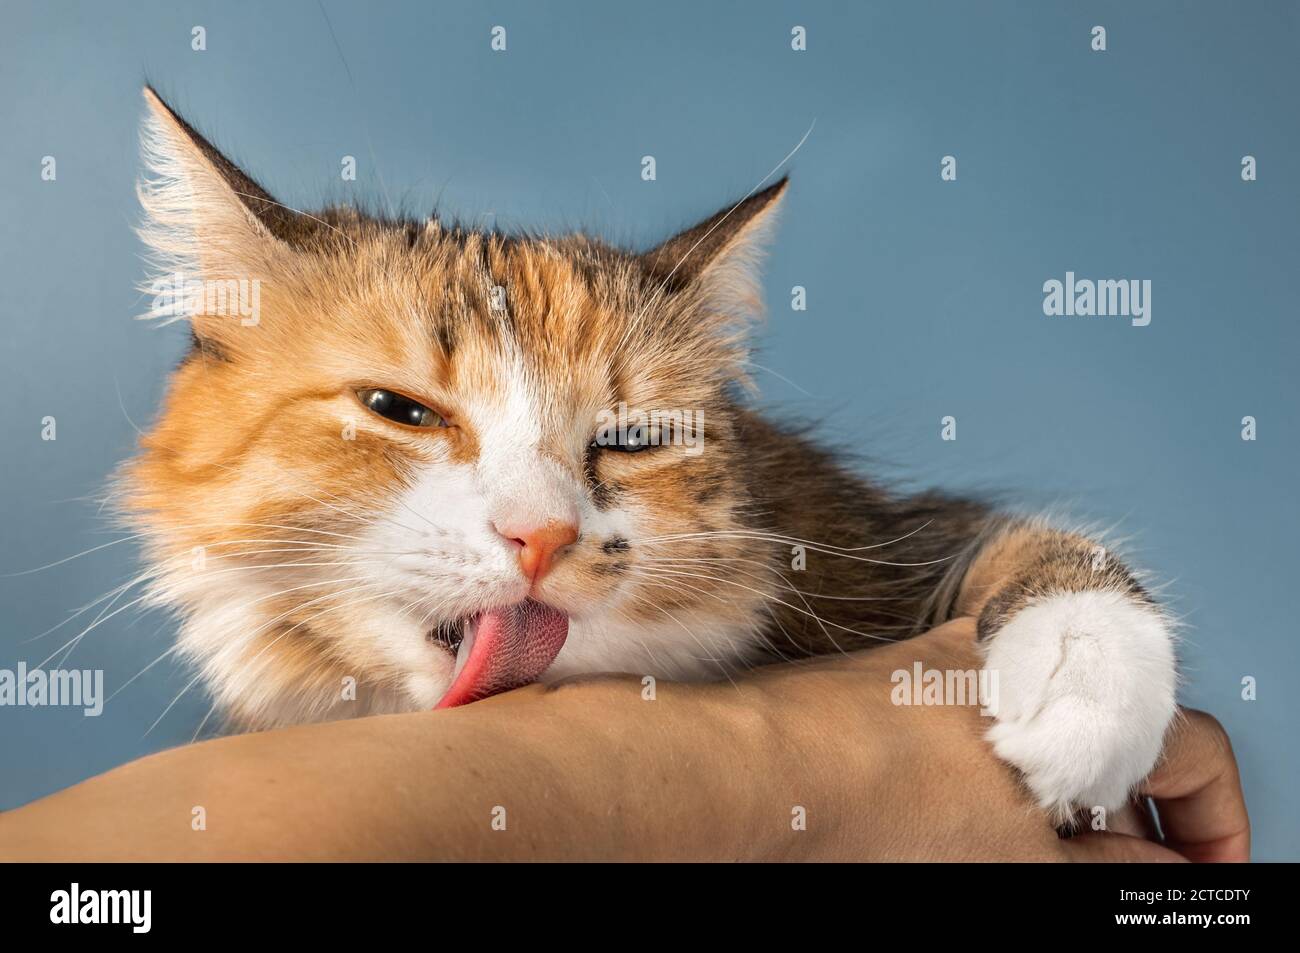 Cat licking human arm. Front view of multicolored cat showing affection and social bonding with the pet owner. Stock Photo